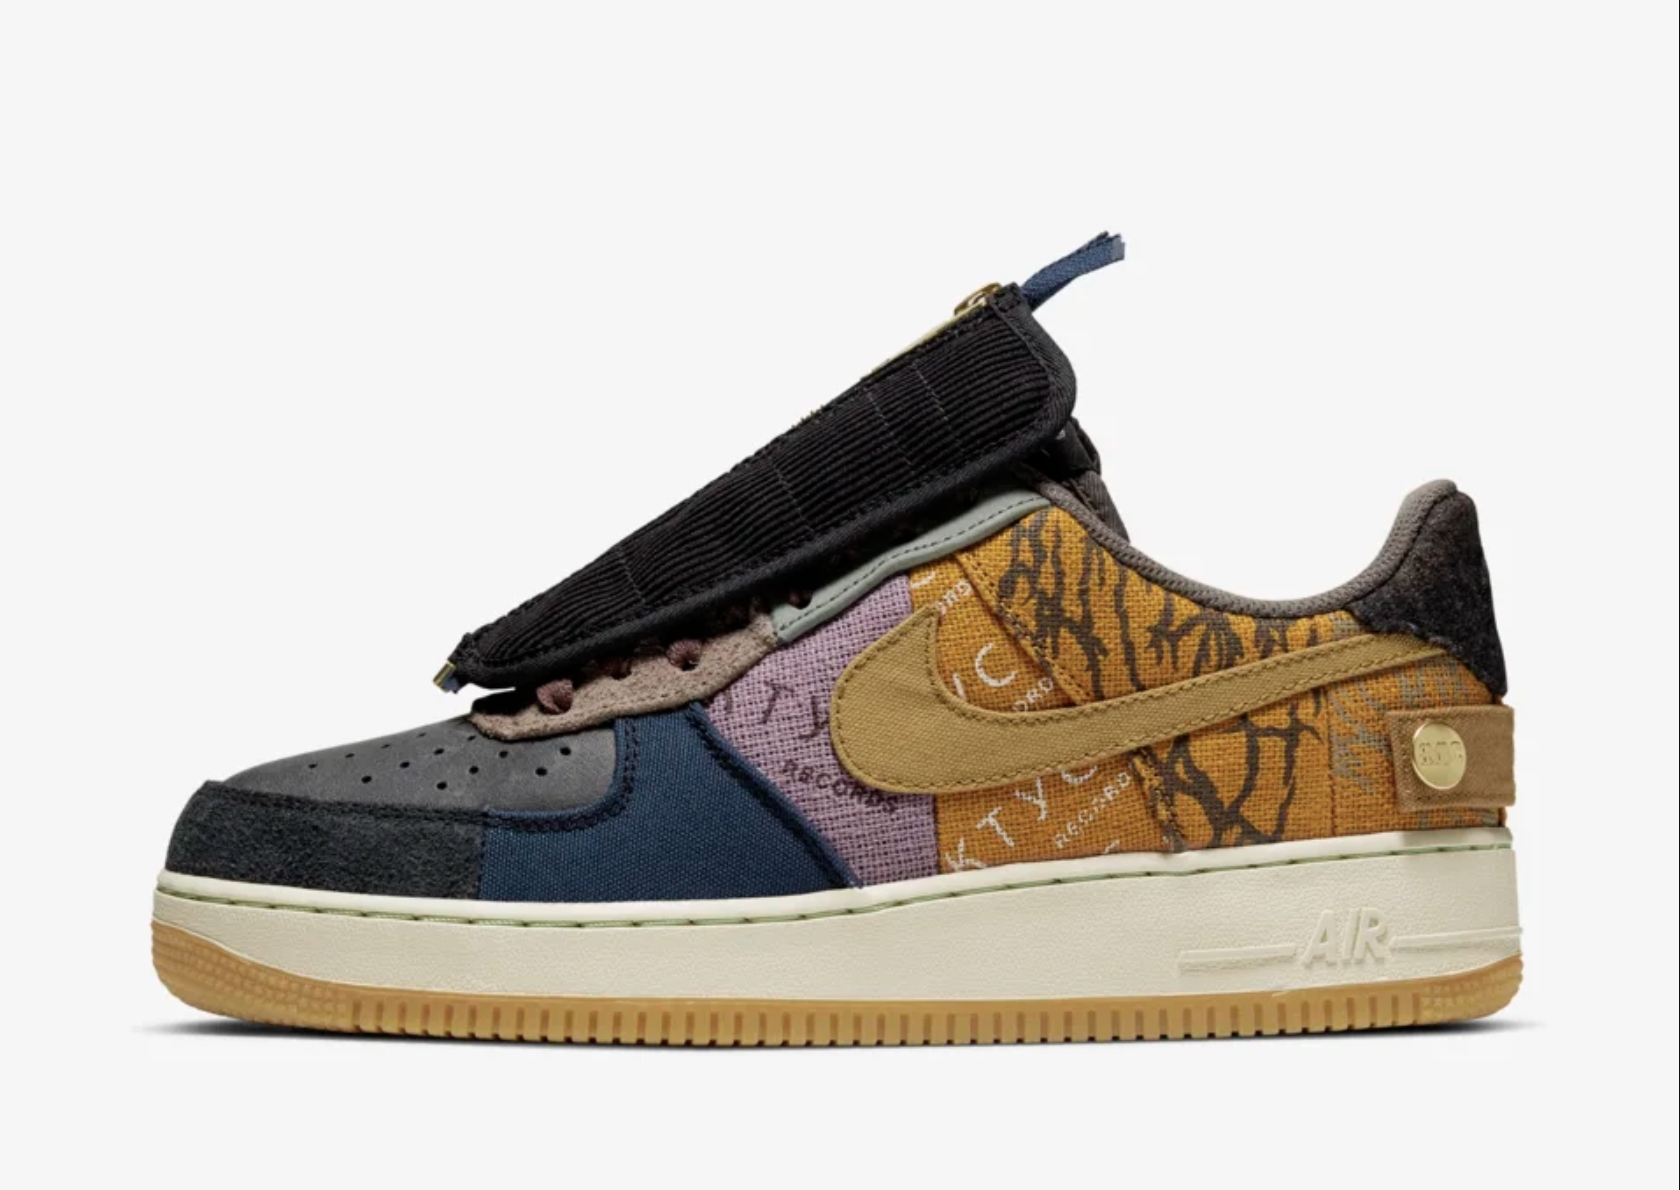 Where To Buy The Travis Scott Nike Cactus Jack AF-1s And More